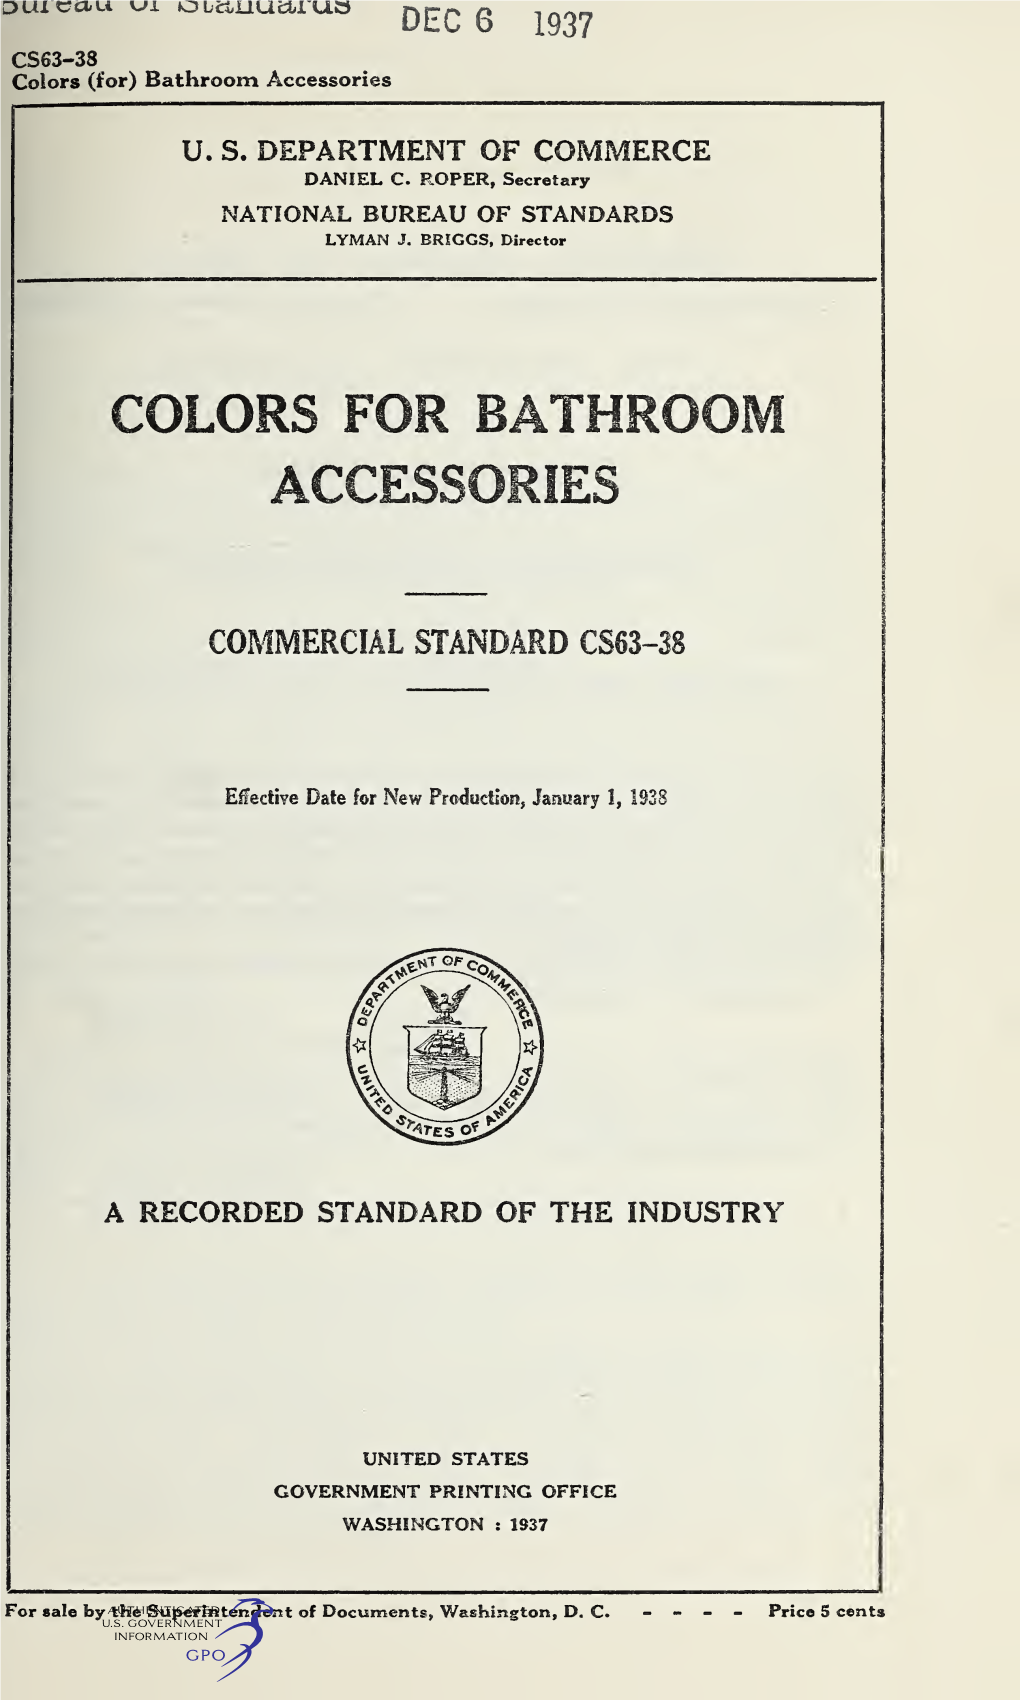 Colors for Bathroom Accessories